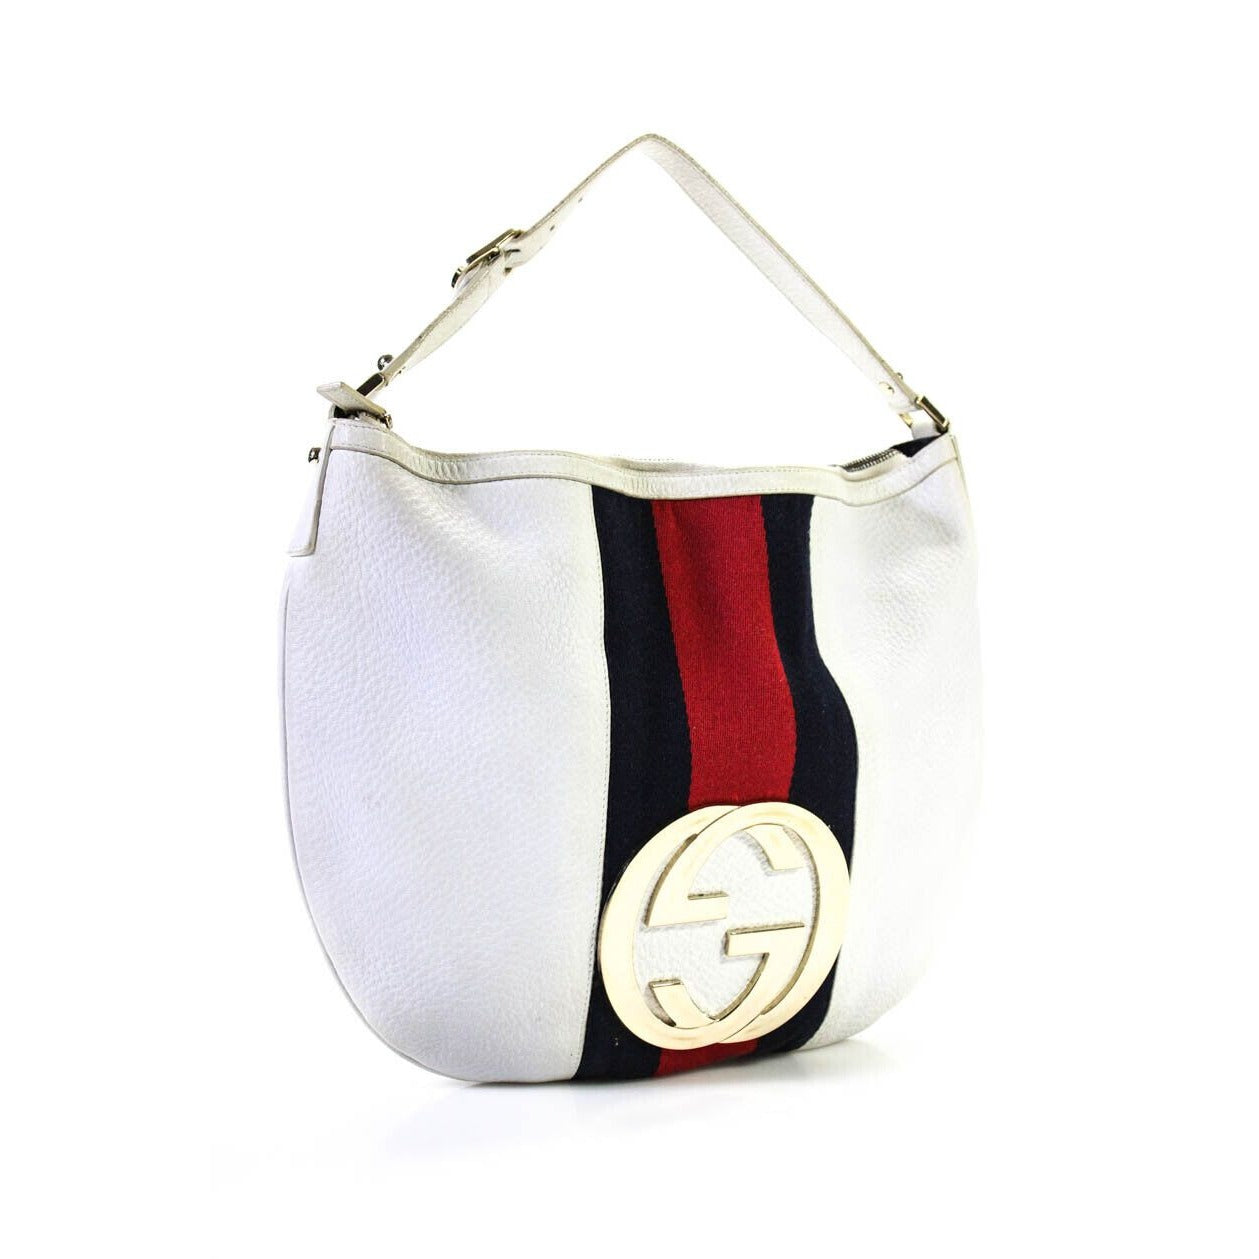 RARE, Gucci 'Blondie', white textured leather, hobo bag style, shoulder bag with a wide red and blue Sherry stripe, an XL gold 'GG' emblem